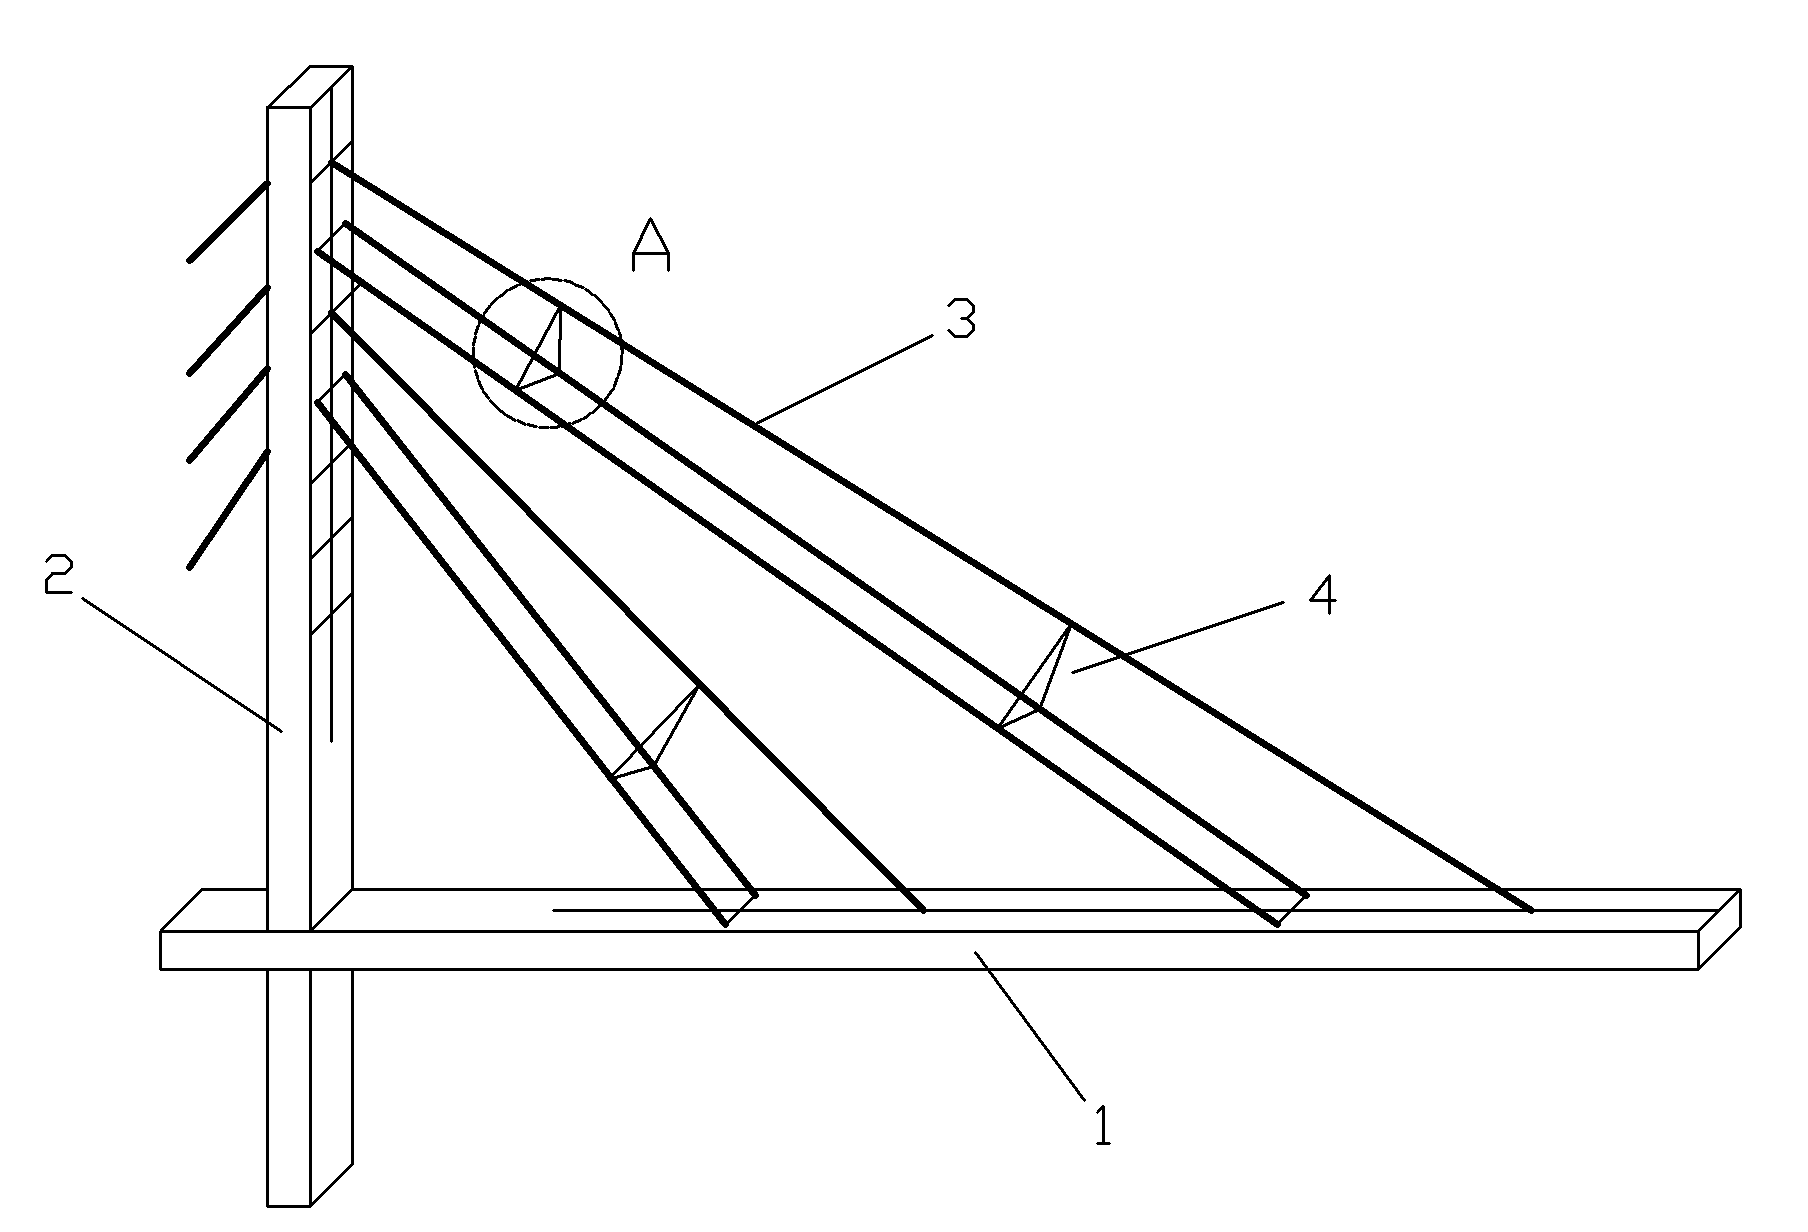 Cable-stayed structure of a cable-stayed bridge